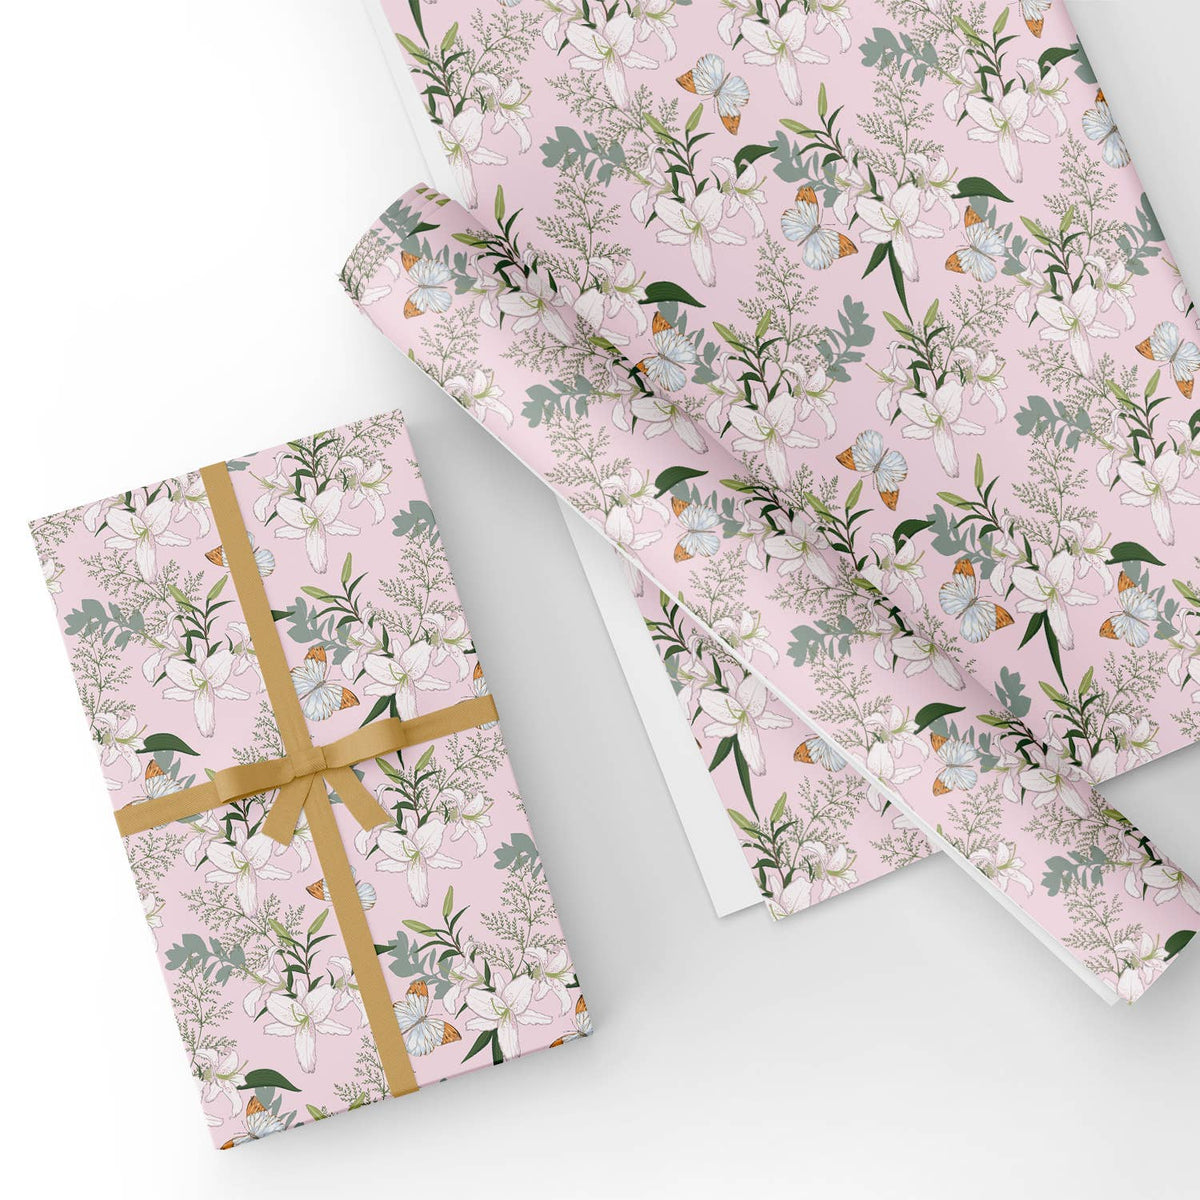 Custom Wrapping Paper Sheets for Wedding, Birthday, Holiday, Mother's Day,  Baby Shower - Florals in Pink, Bulk Wrapping Paper Printed – WrapaholicGifts